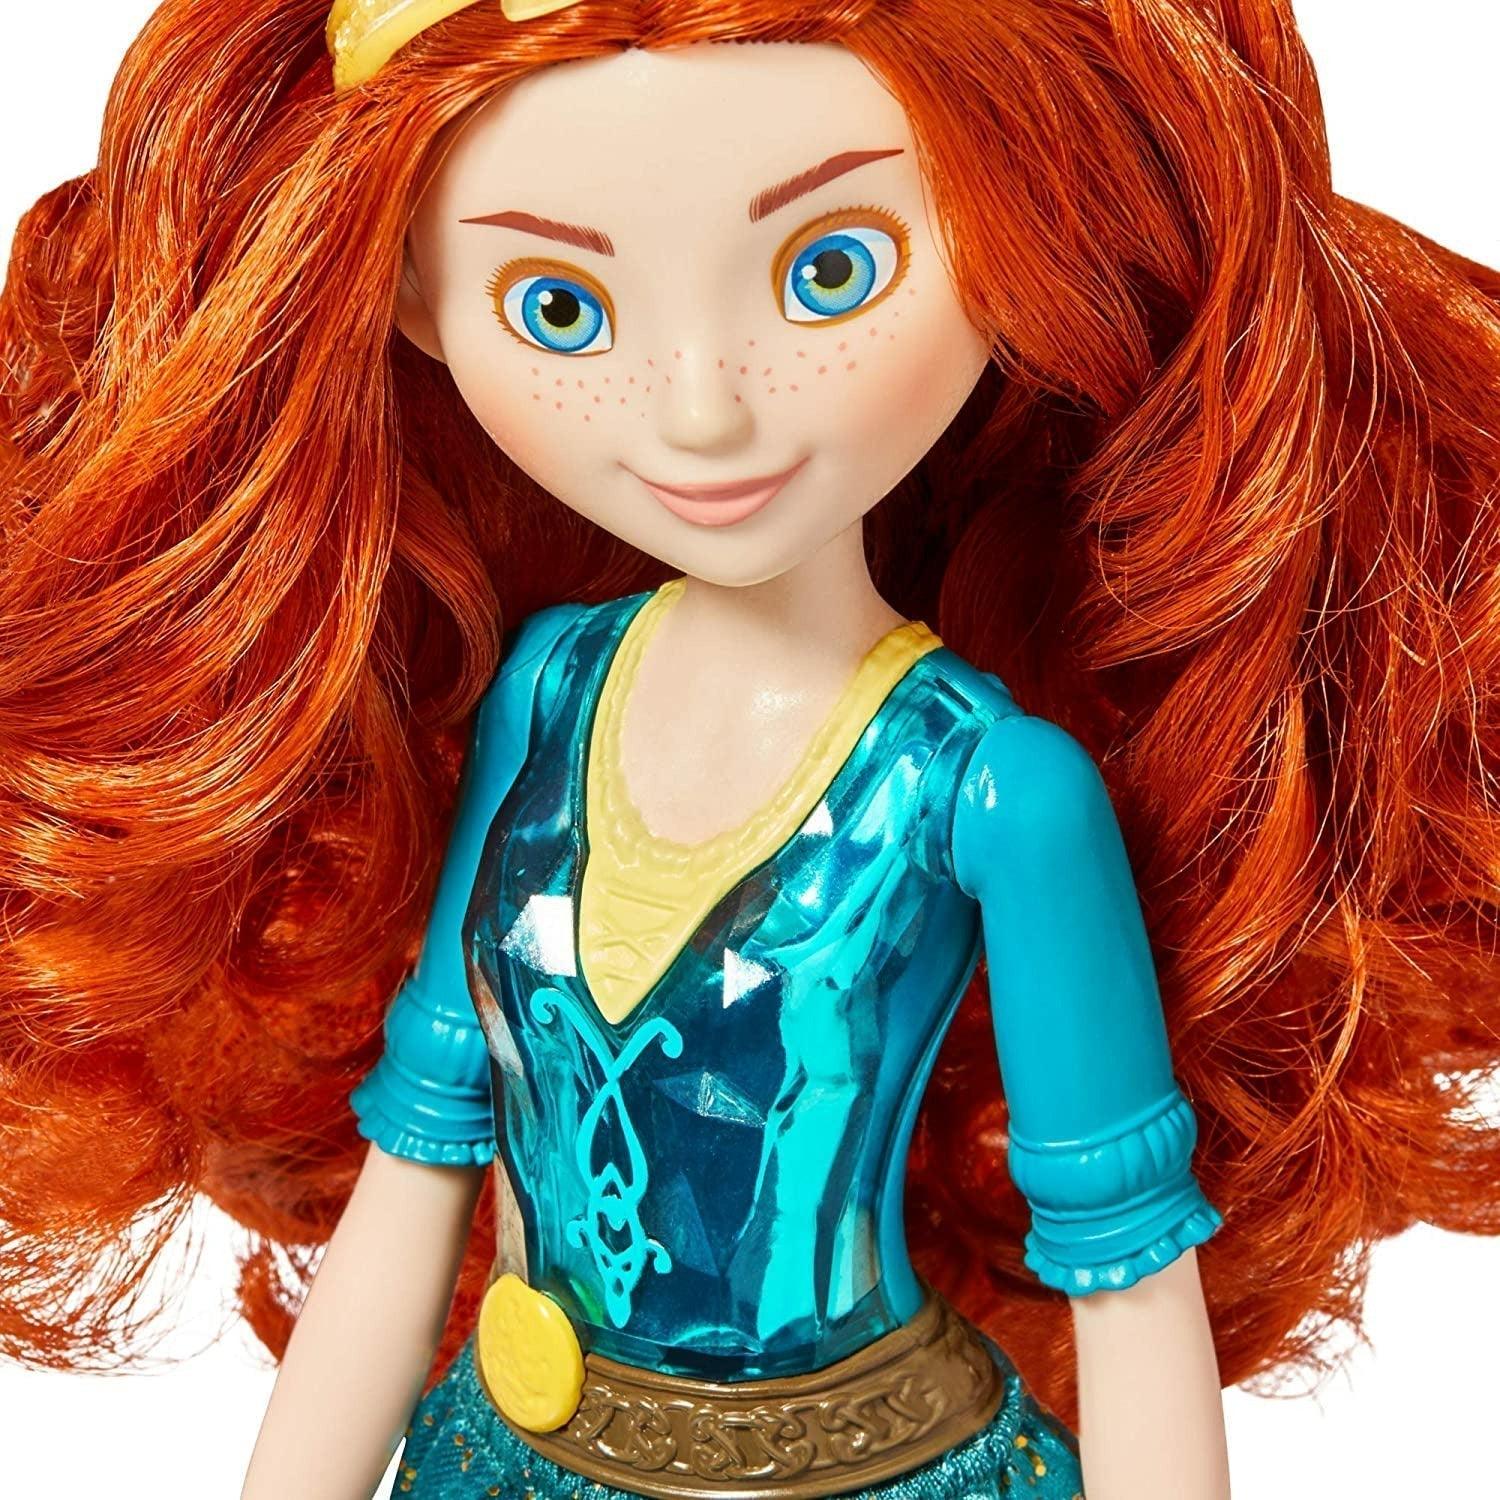 Mattel Disney Princess Merida Fashion Doll, New for 2023, Sparkling Look with Red Hair, Blue Eyes & Hair Accessory - BumbleToys - 4+ Years, 5-7 Years, Characters, Disney, Disney Princess, Dolls, Fashion Dolls & Accessories, Girls, Pre-Order